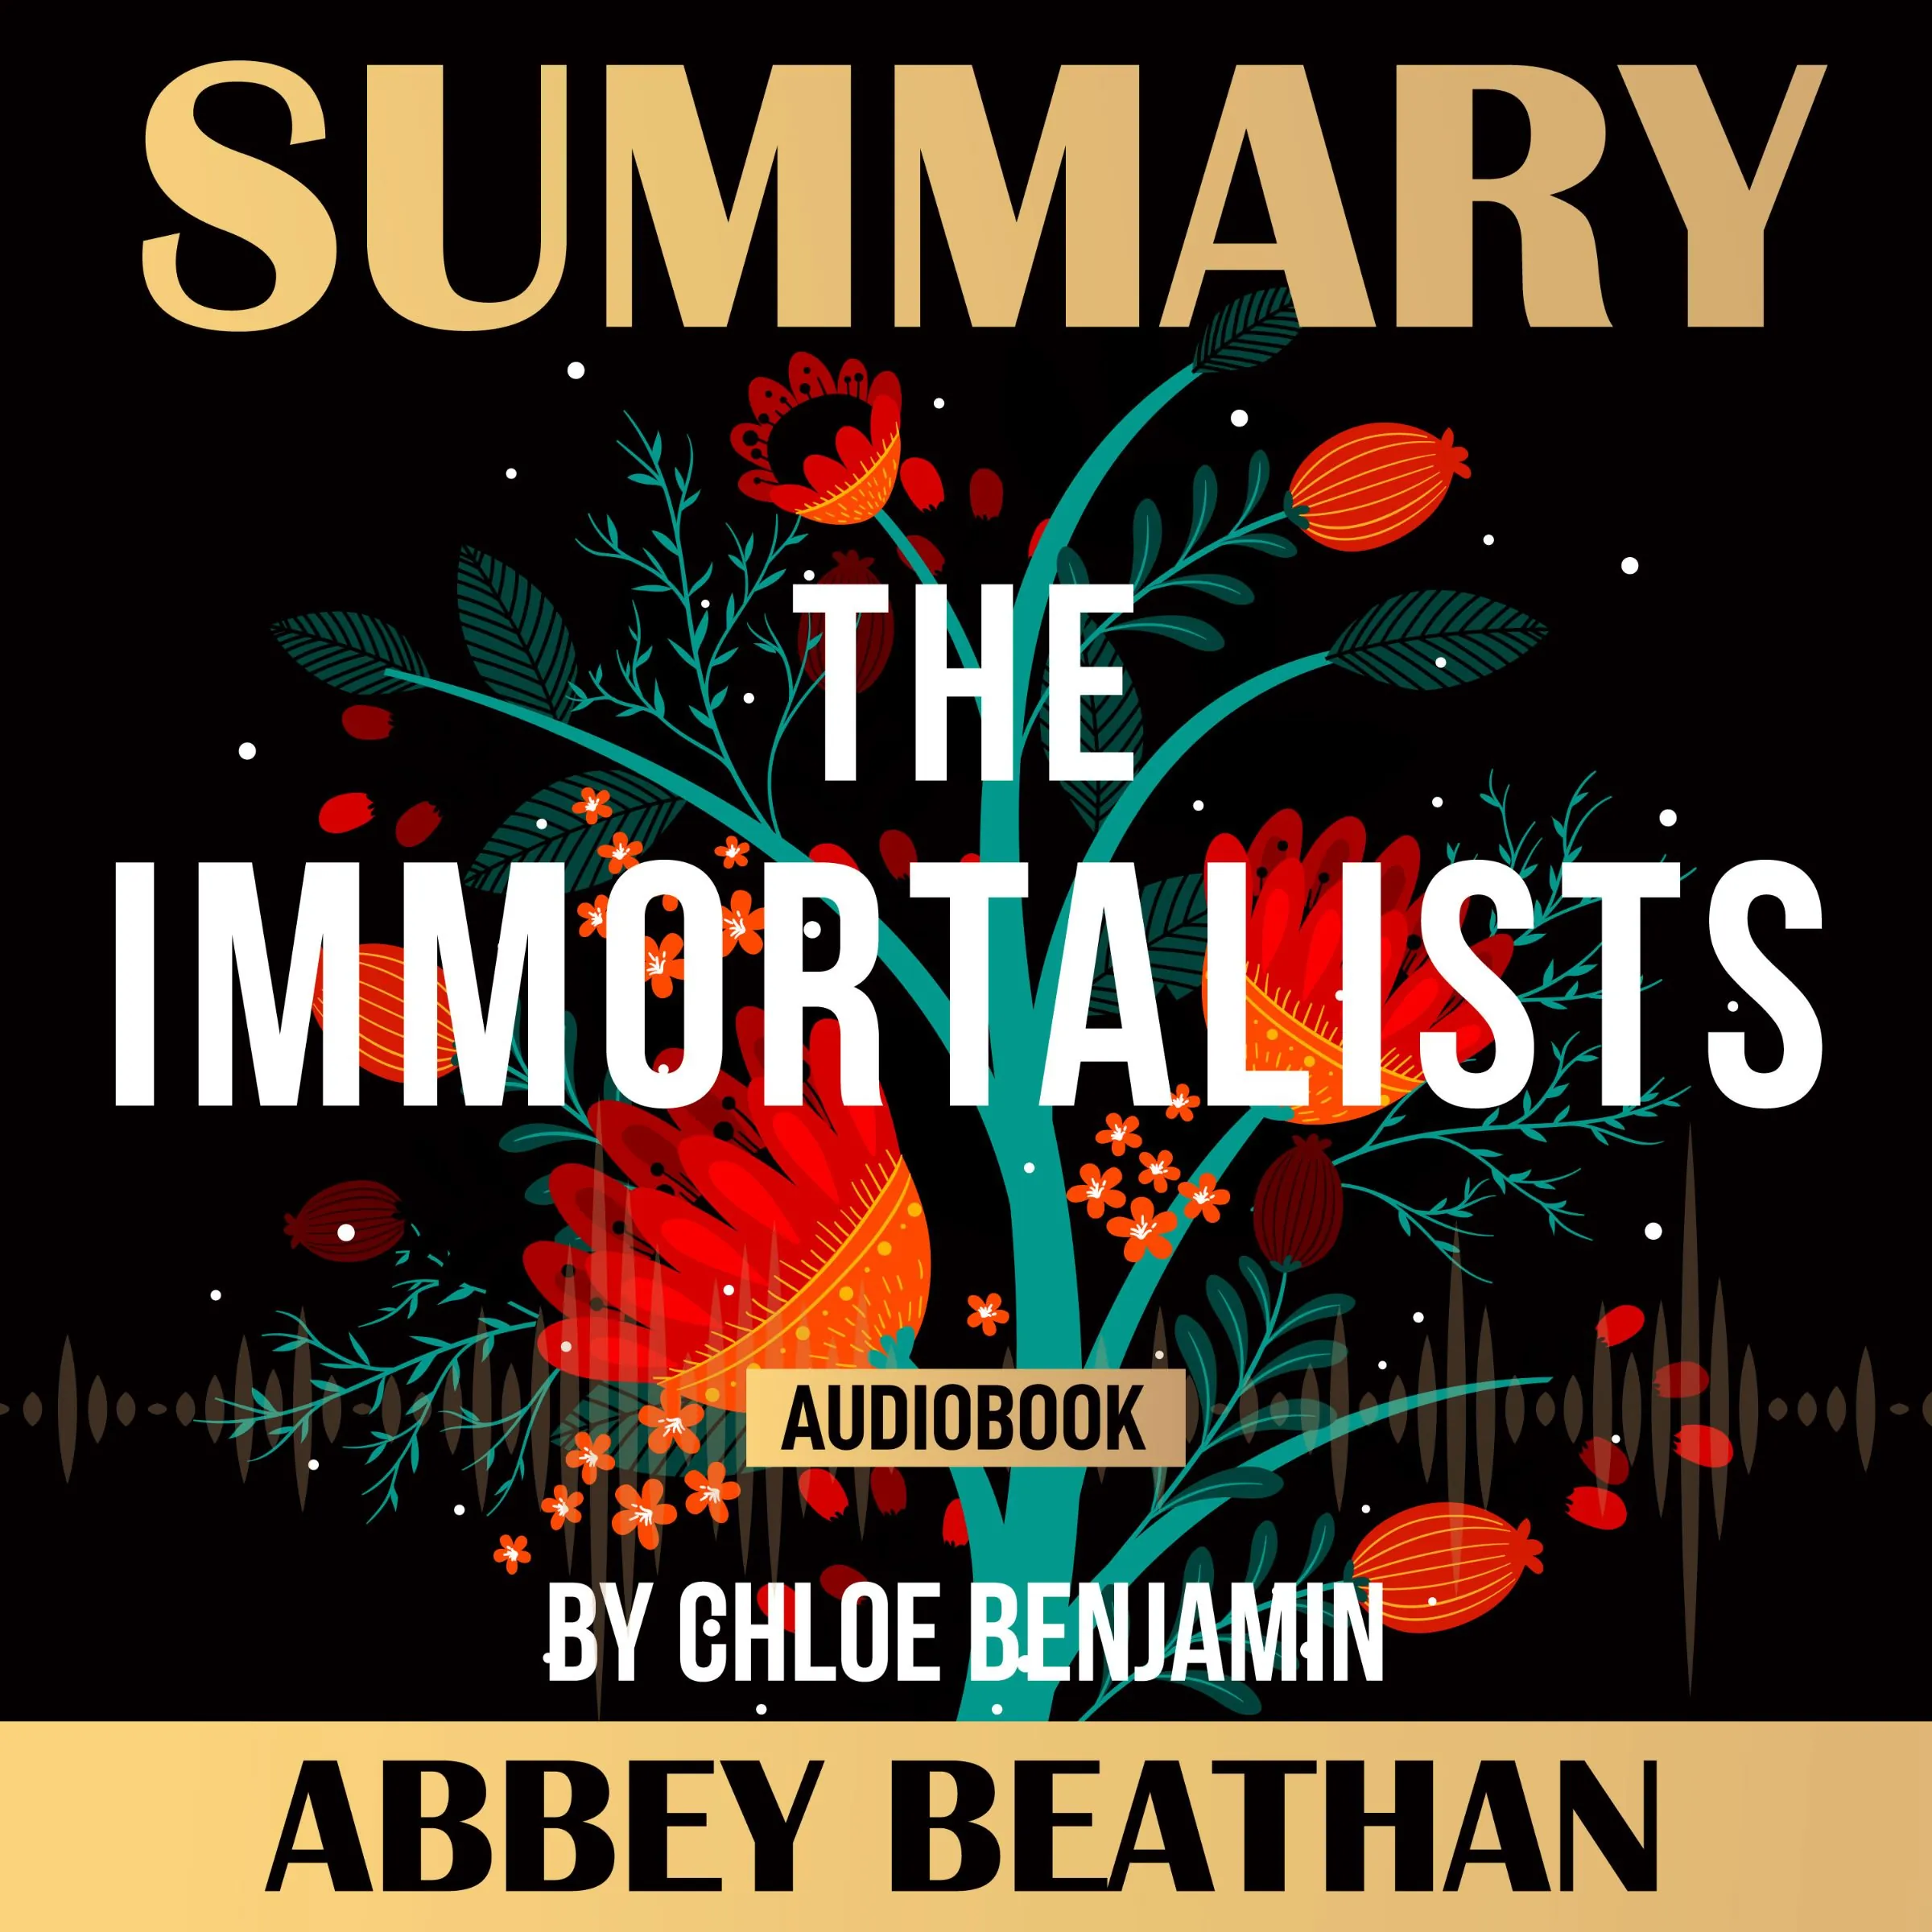 Summary of The Immortalists by Chloe Benjamin Audiobook by Abbey Beathan